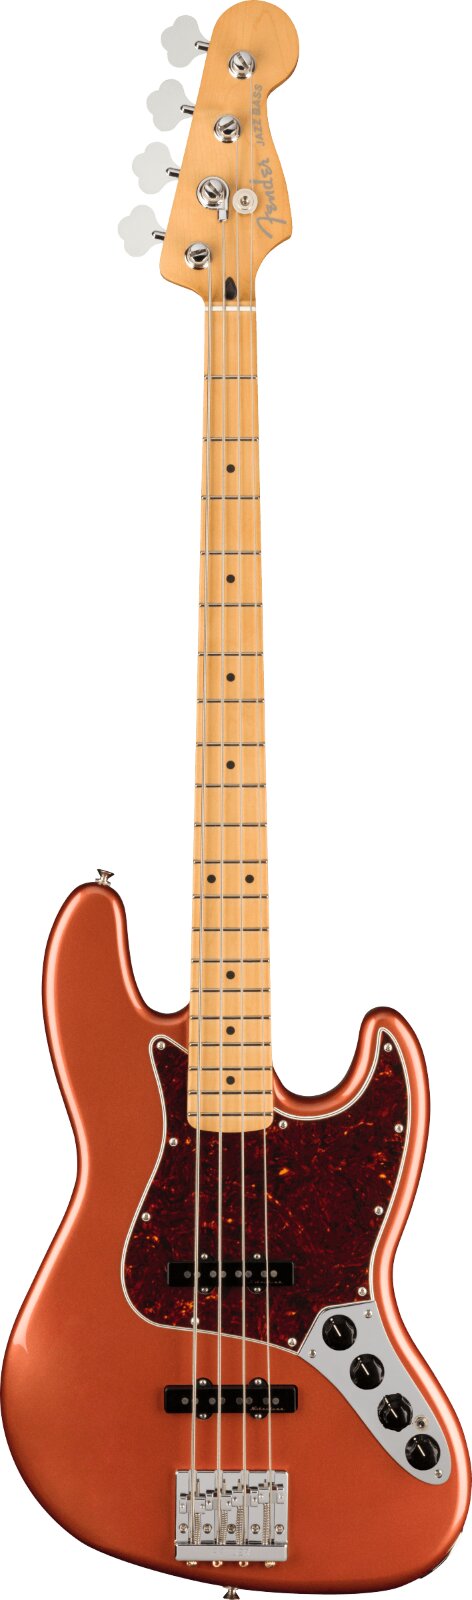 Fender Player Plus Jazz Bass, Maple Fingerboard, Aged Candy Apple Red : photo 1